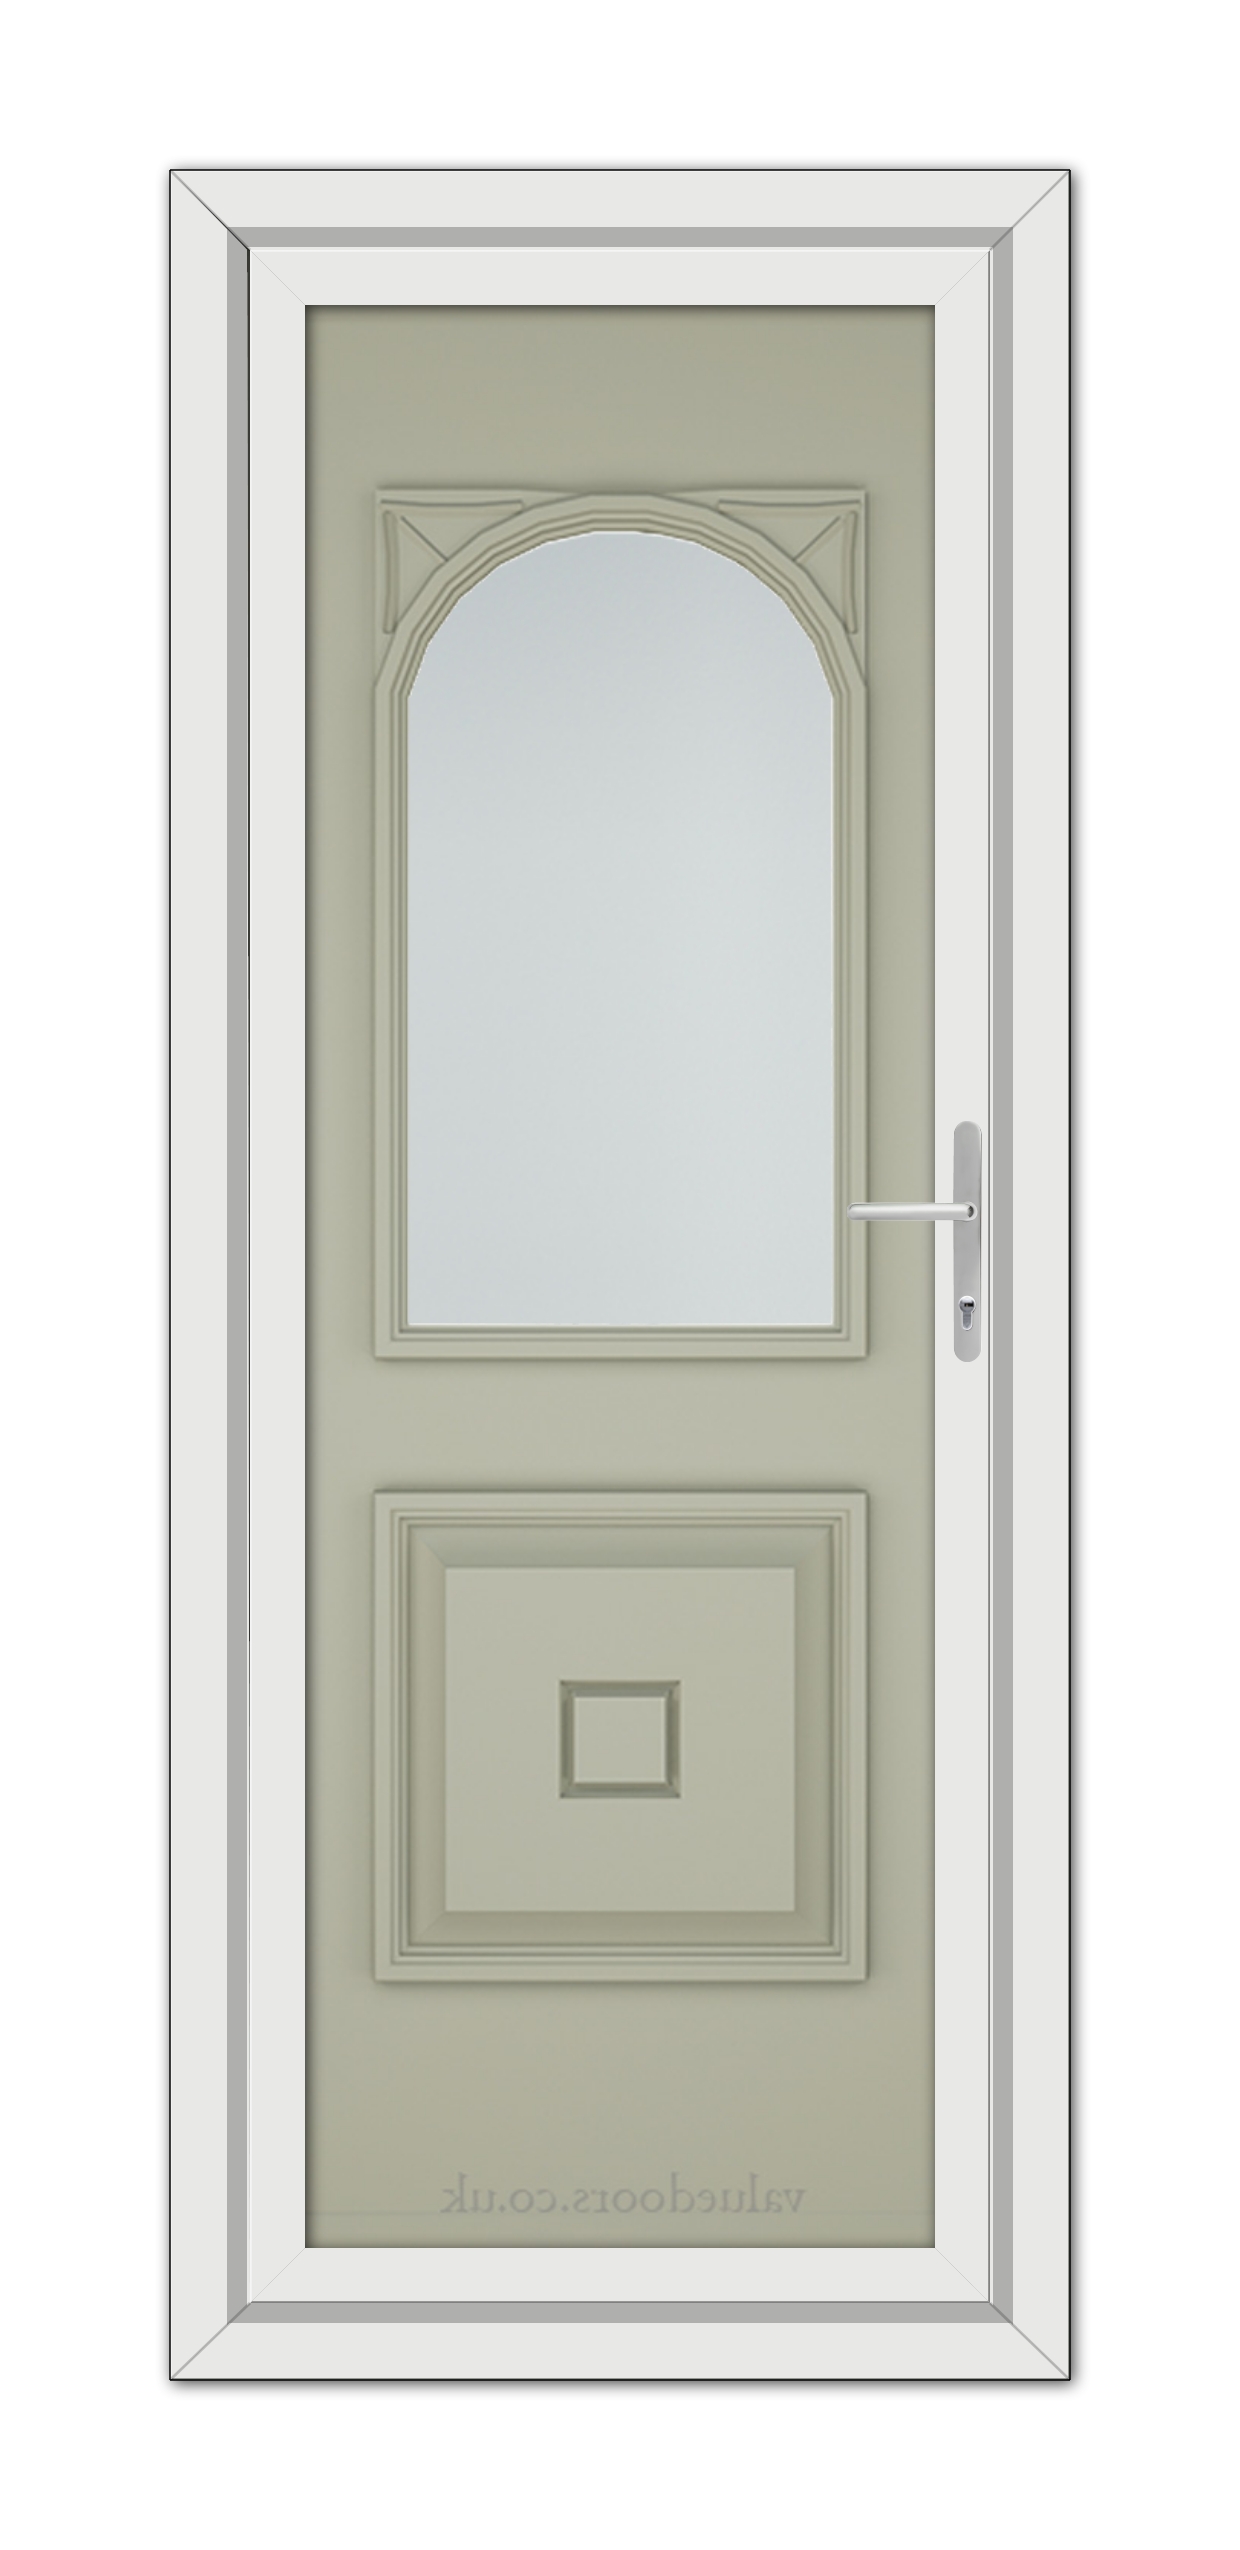 A vertical image of a closed Agate Grey Reims uPVC door with an arched mirror at the top and a metallic handle on the right side, set within a white frame.